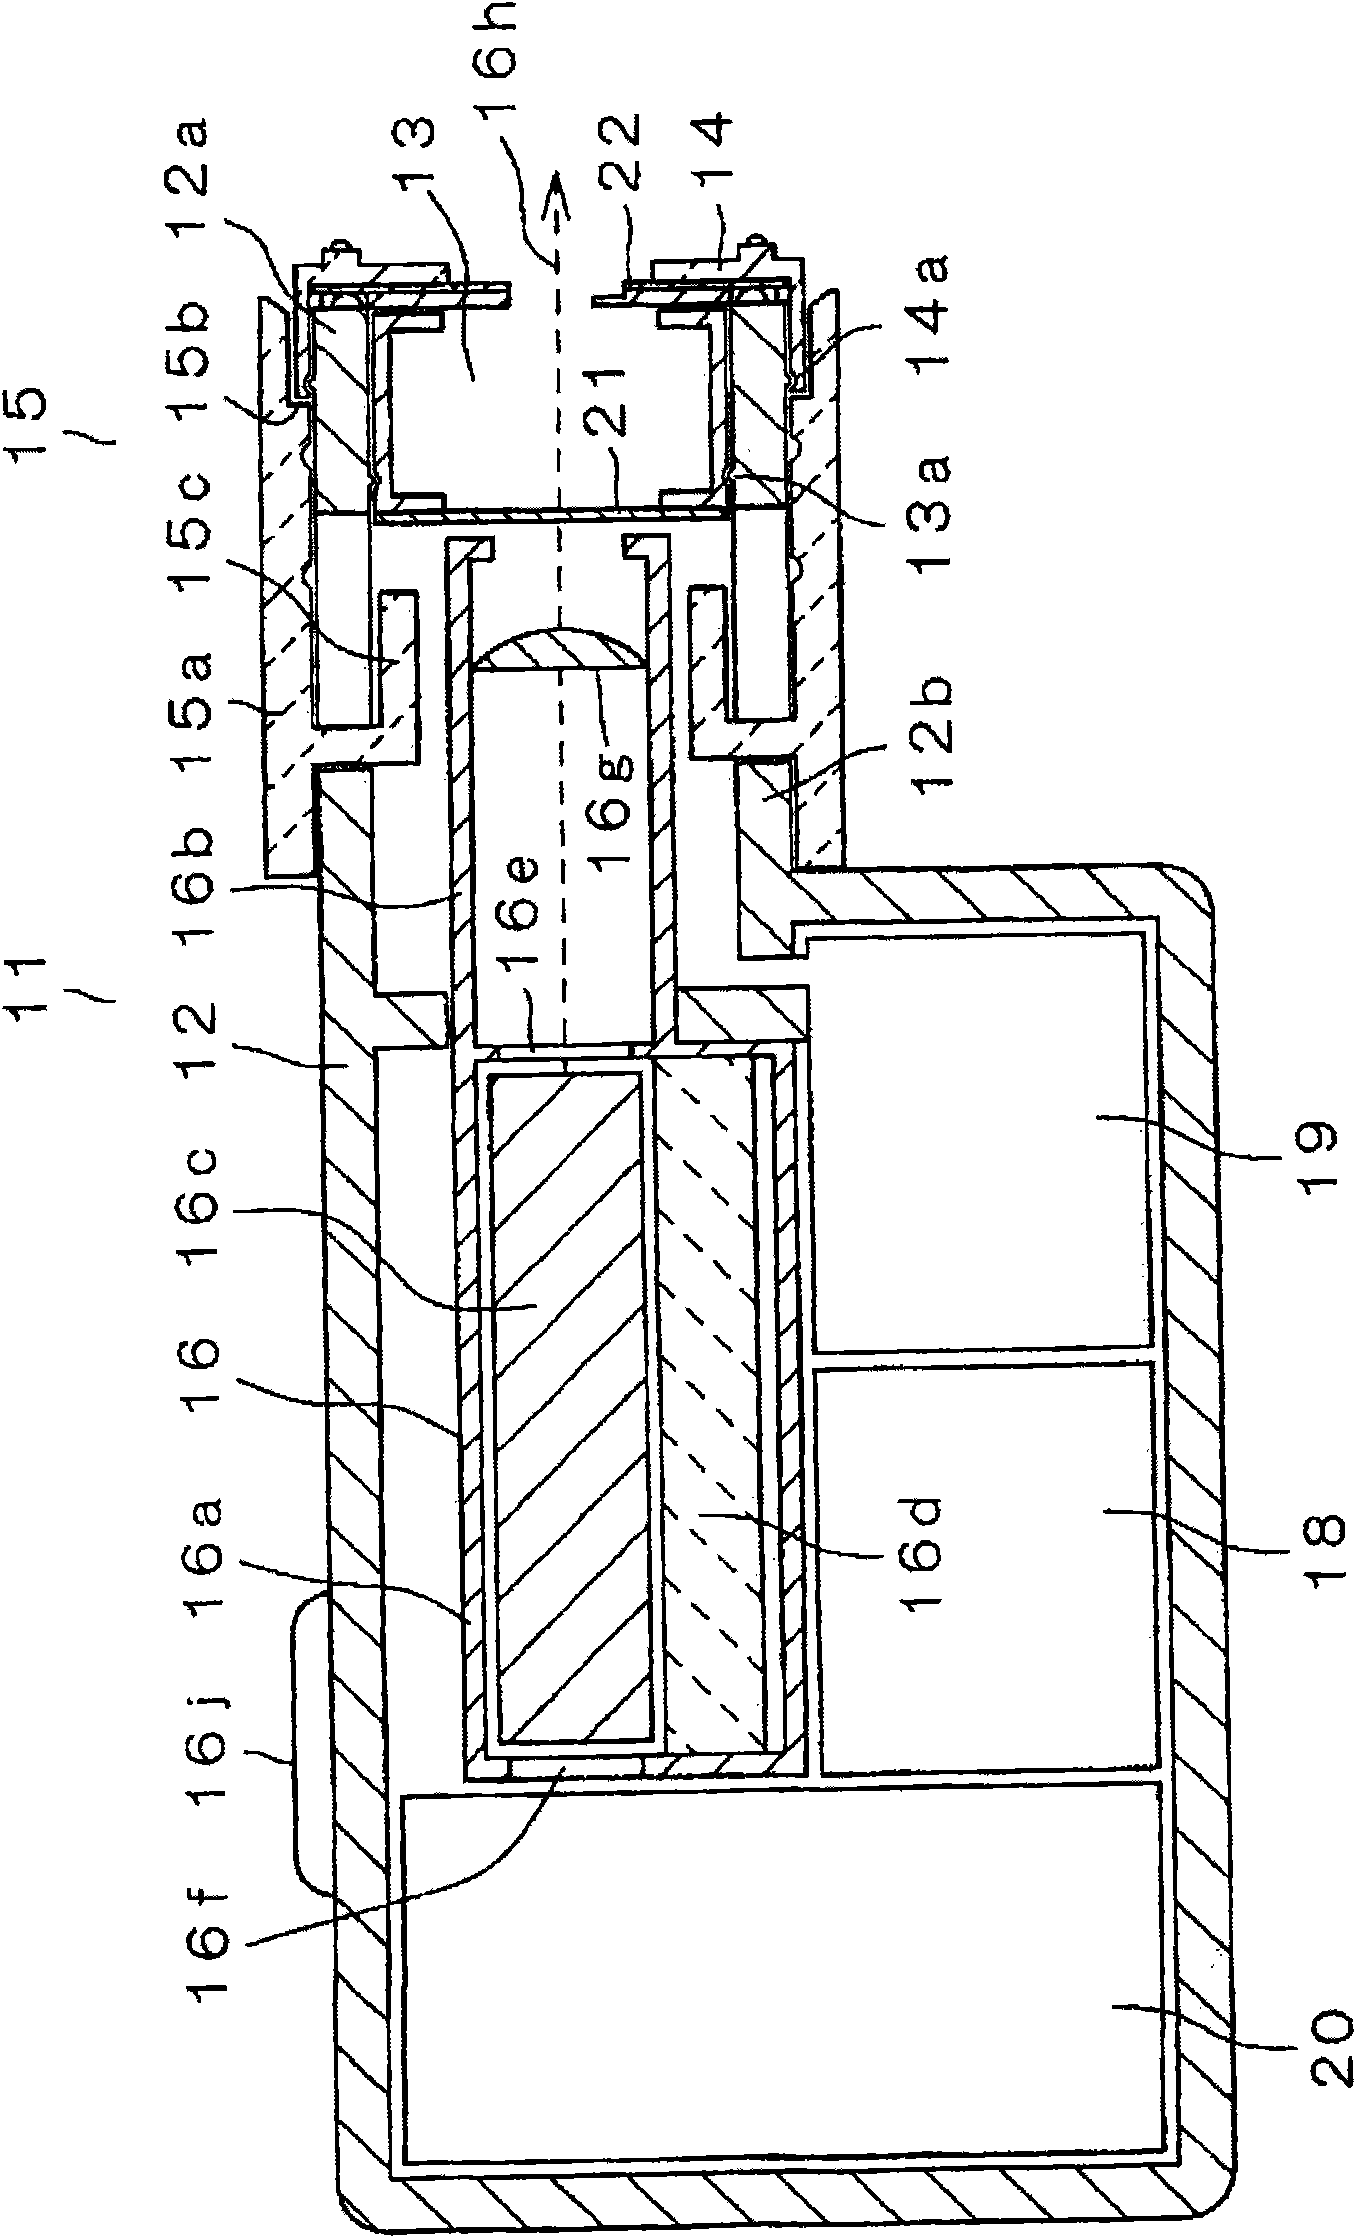 Blood inspection device